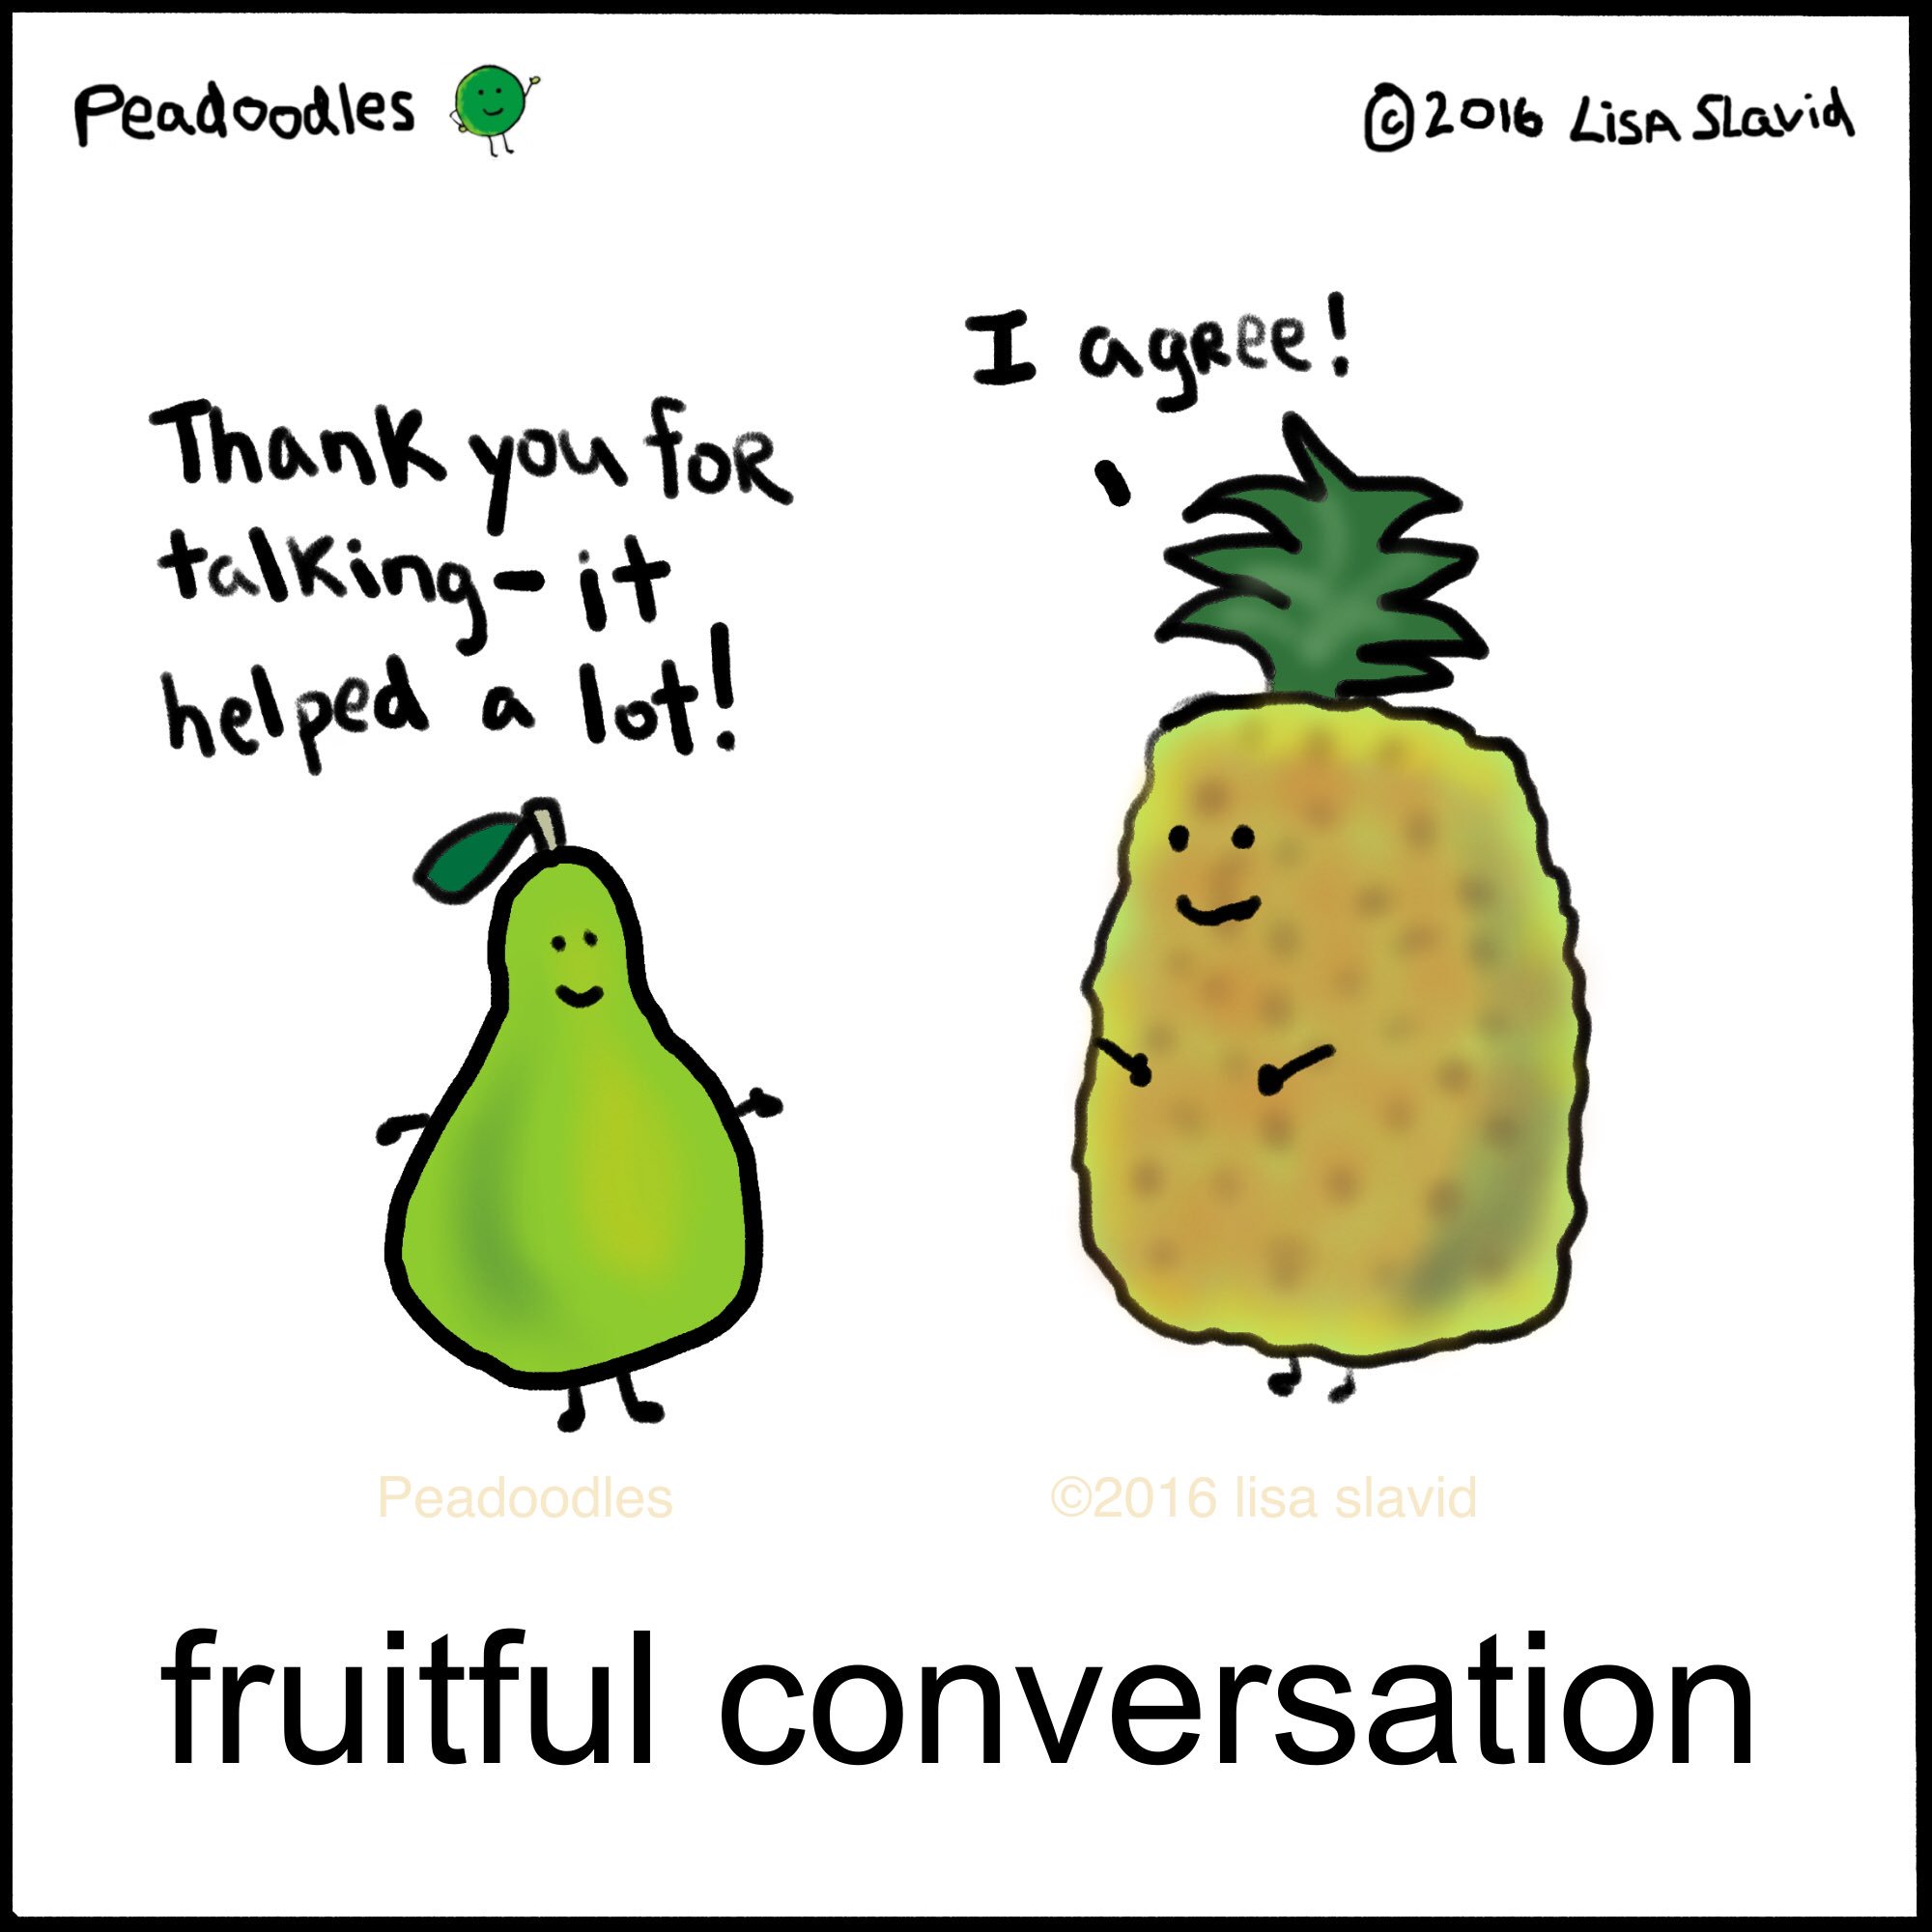 A pear is speaking to a pineapple and says, "Thank you for talking - it helped a lot!" The pineapple responds, "I agree!" The caption reads: "Fruitful Conversation."